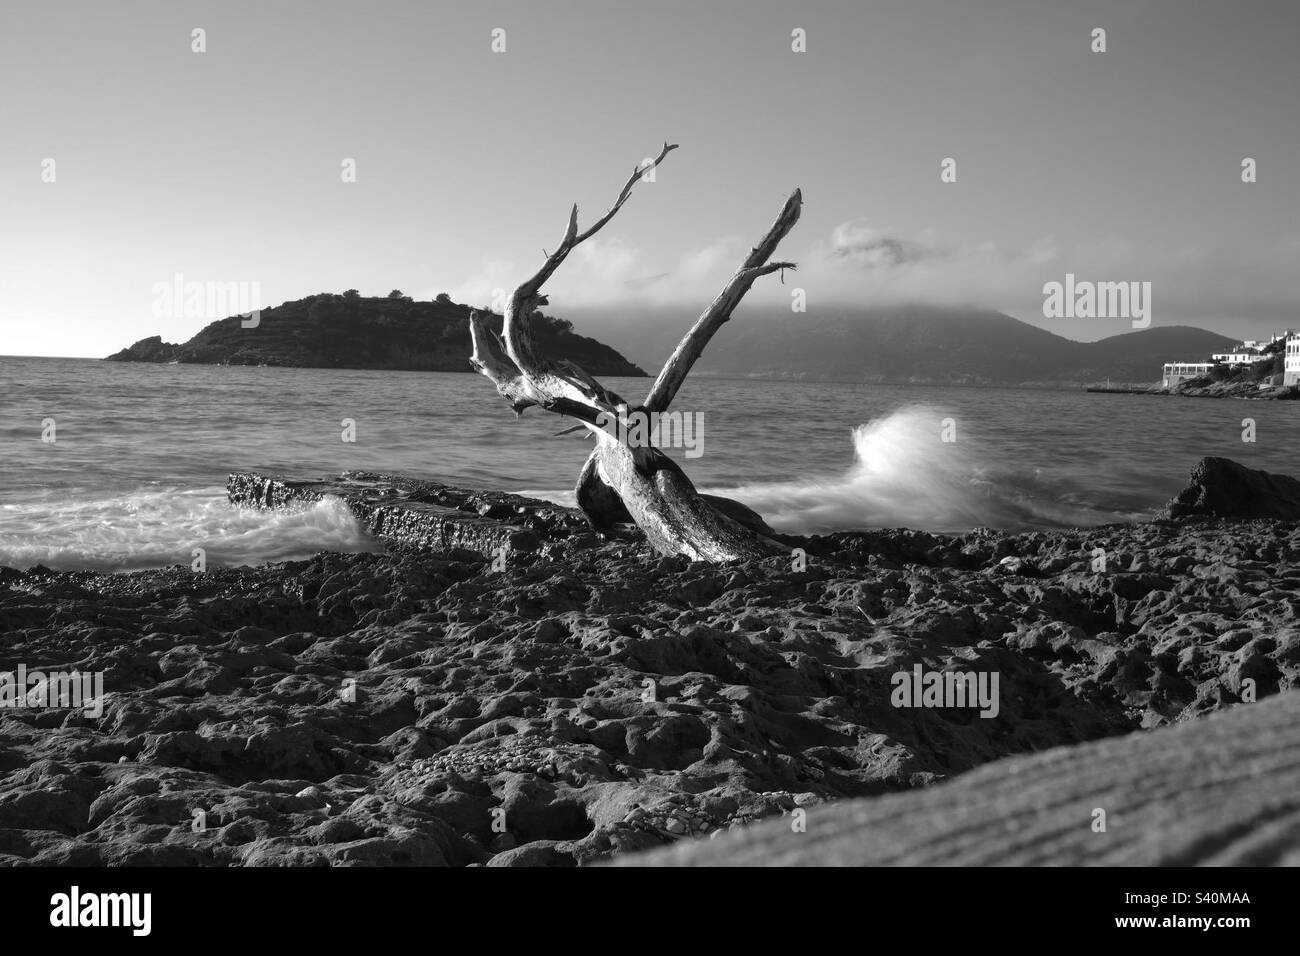 Stranded at the beach, broken tree at the coastline in black and white and the waves breaking on the shoreline Stock Photo